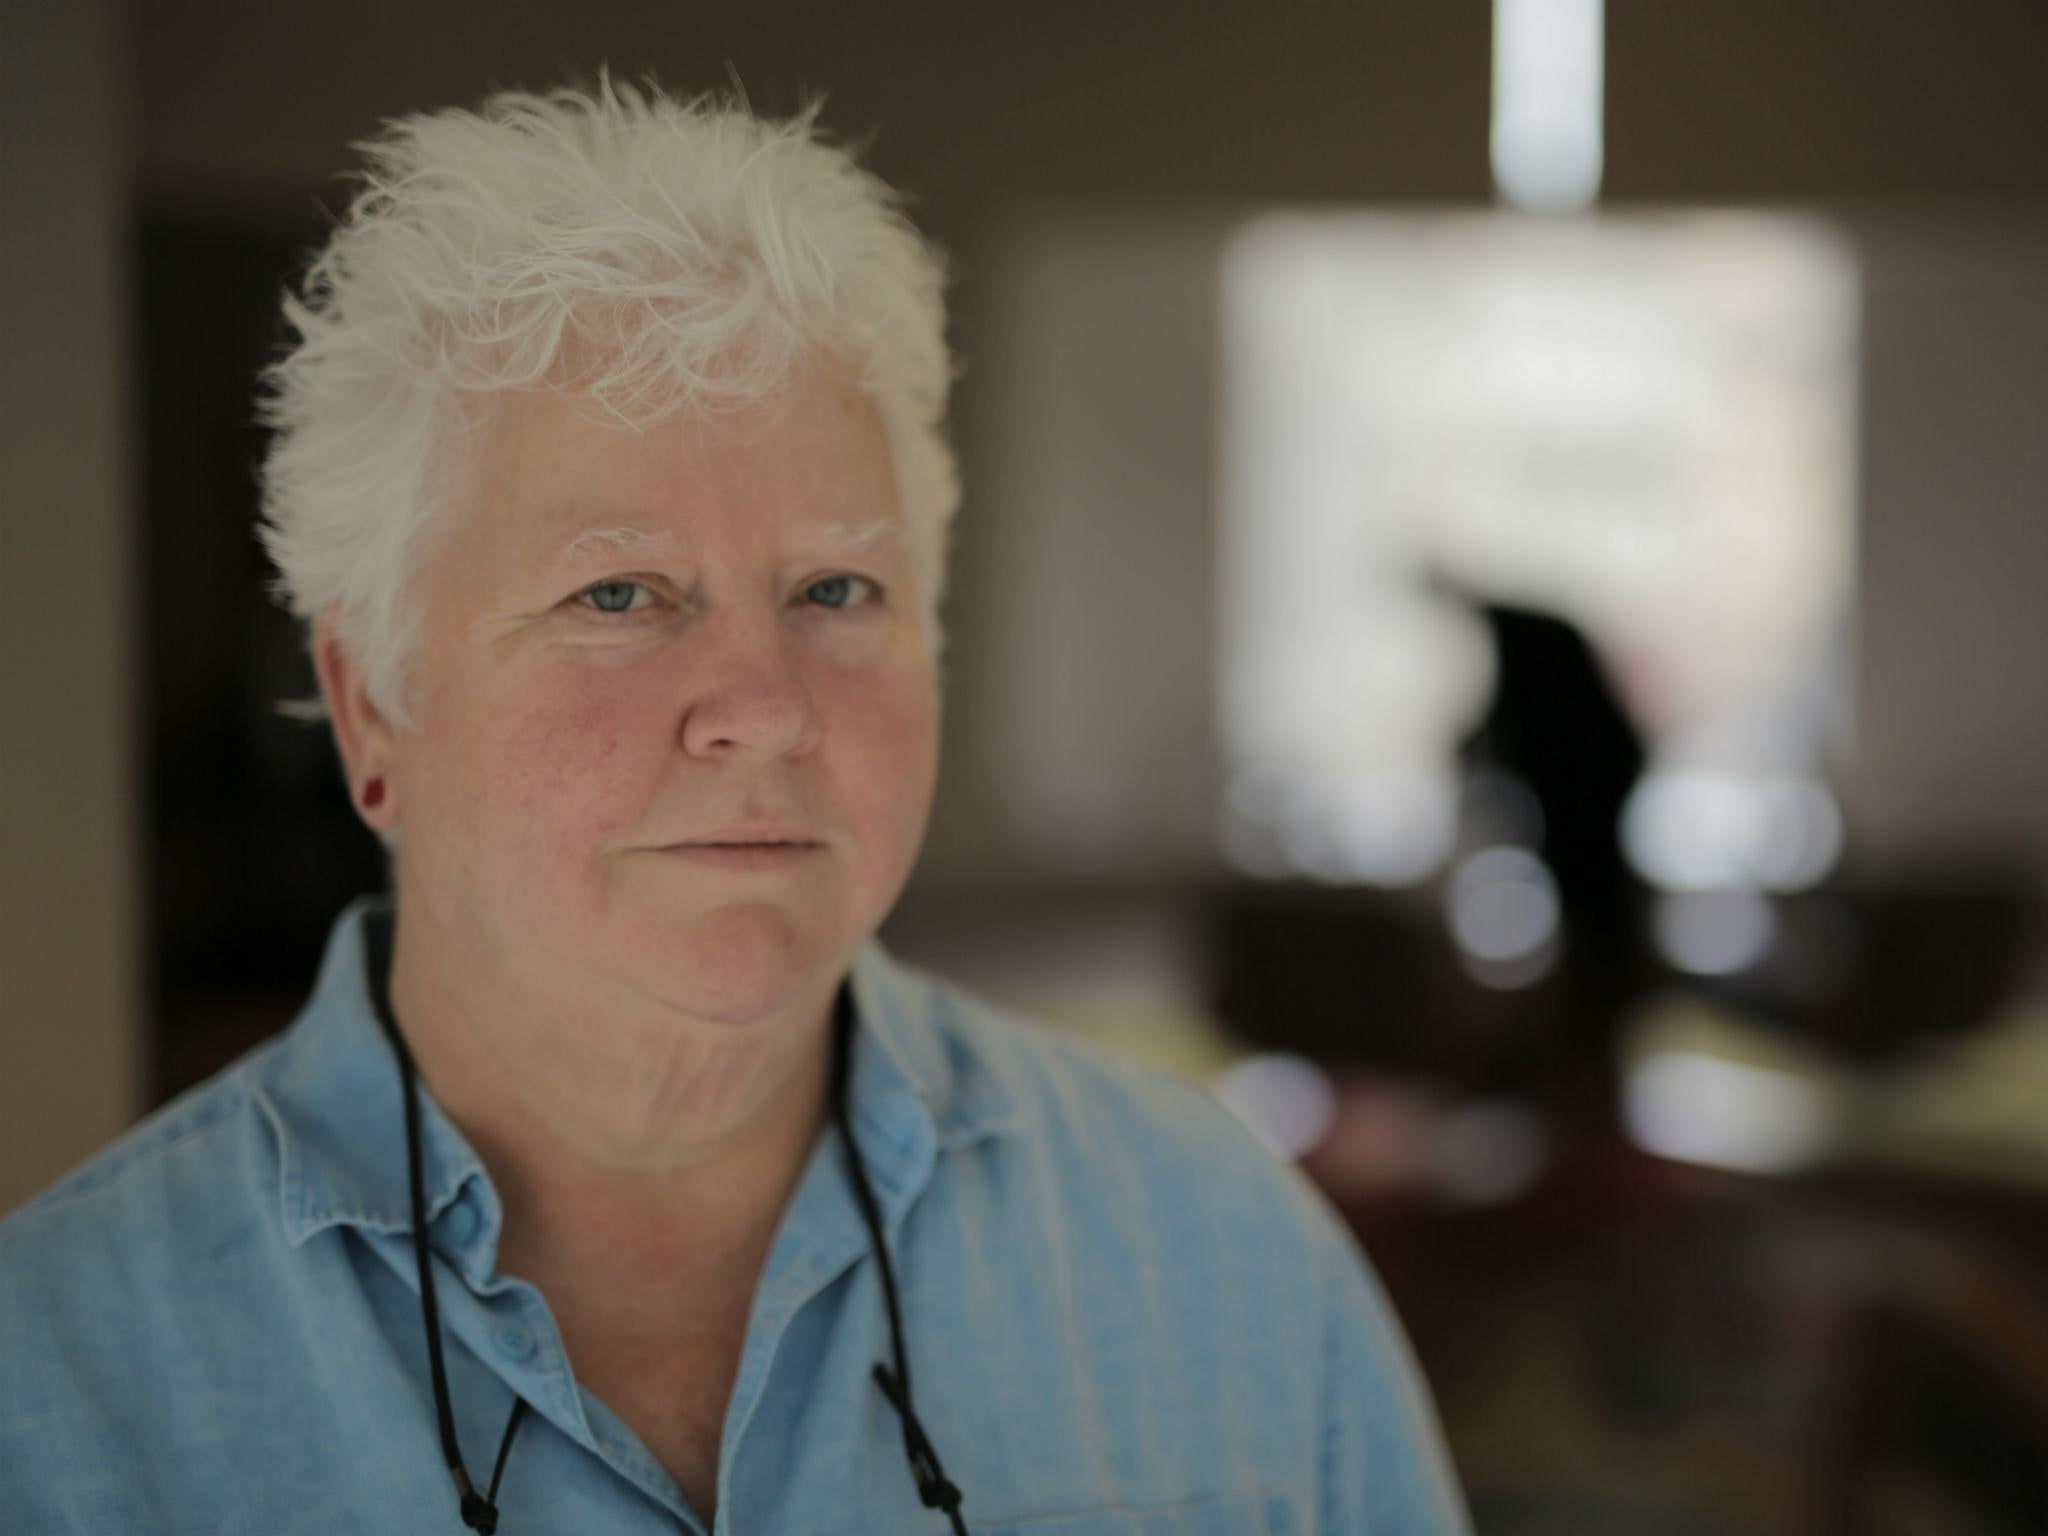 Best-selling crime author Val McDermid